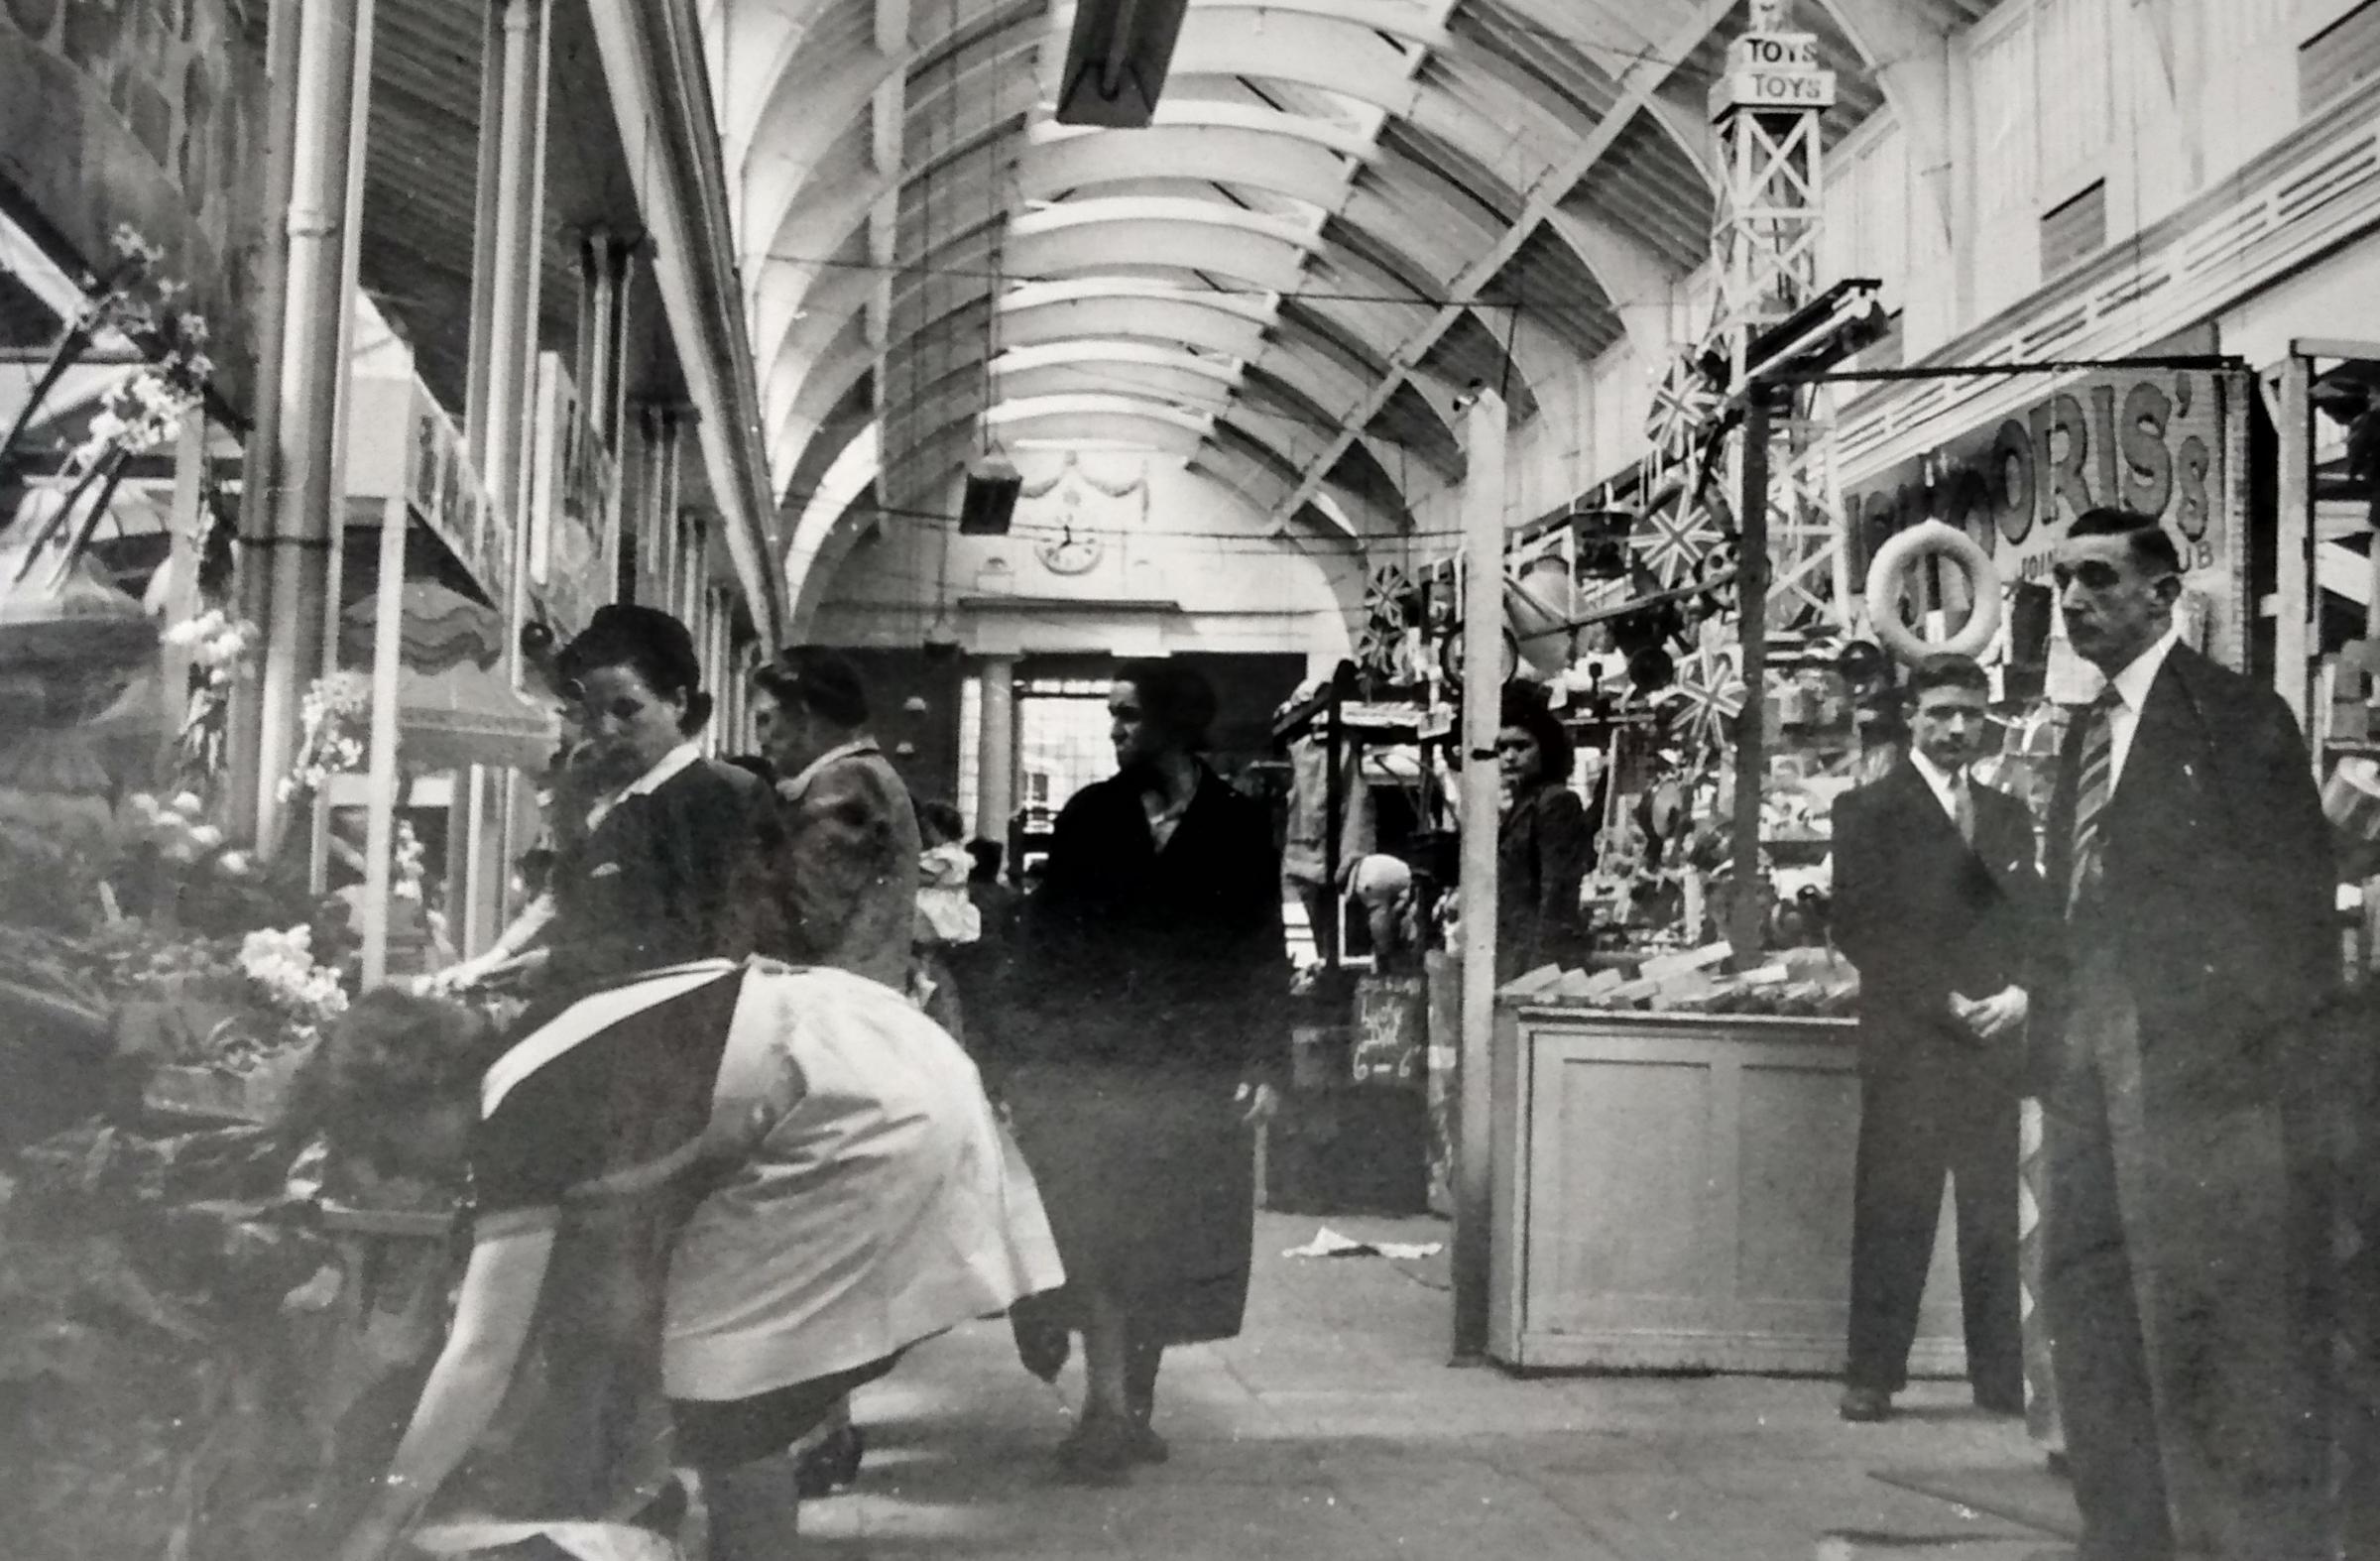 The Market Hall in the 1950s, not long before it was demolished